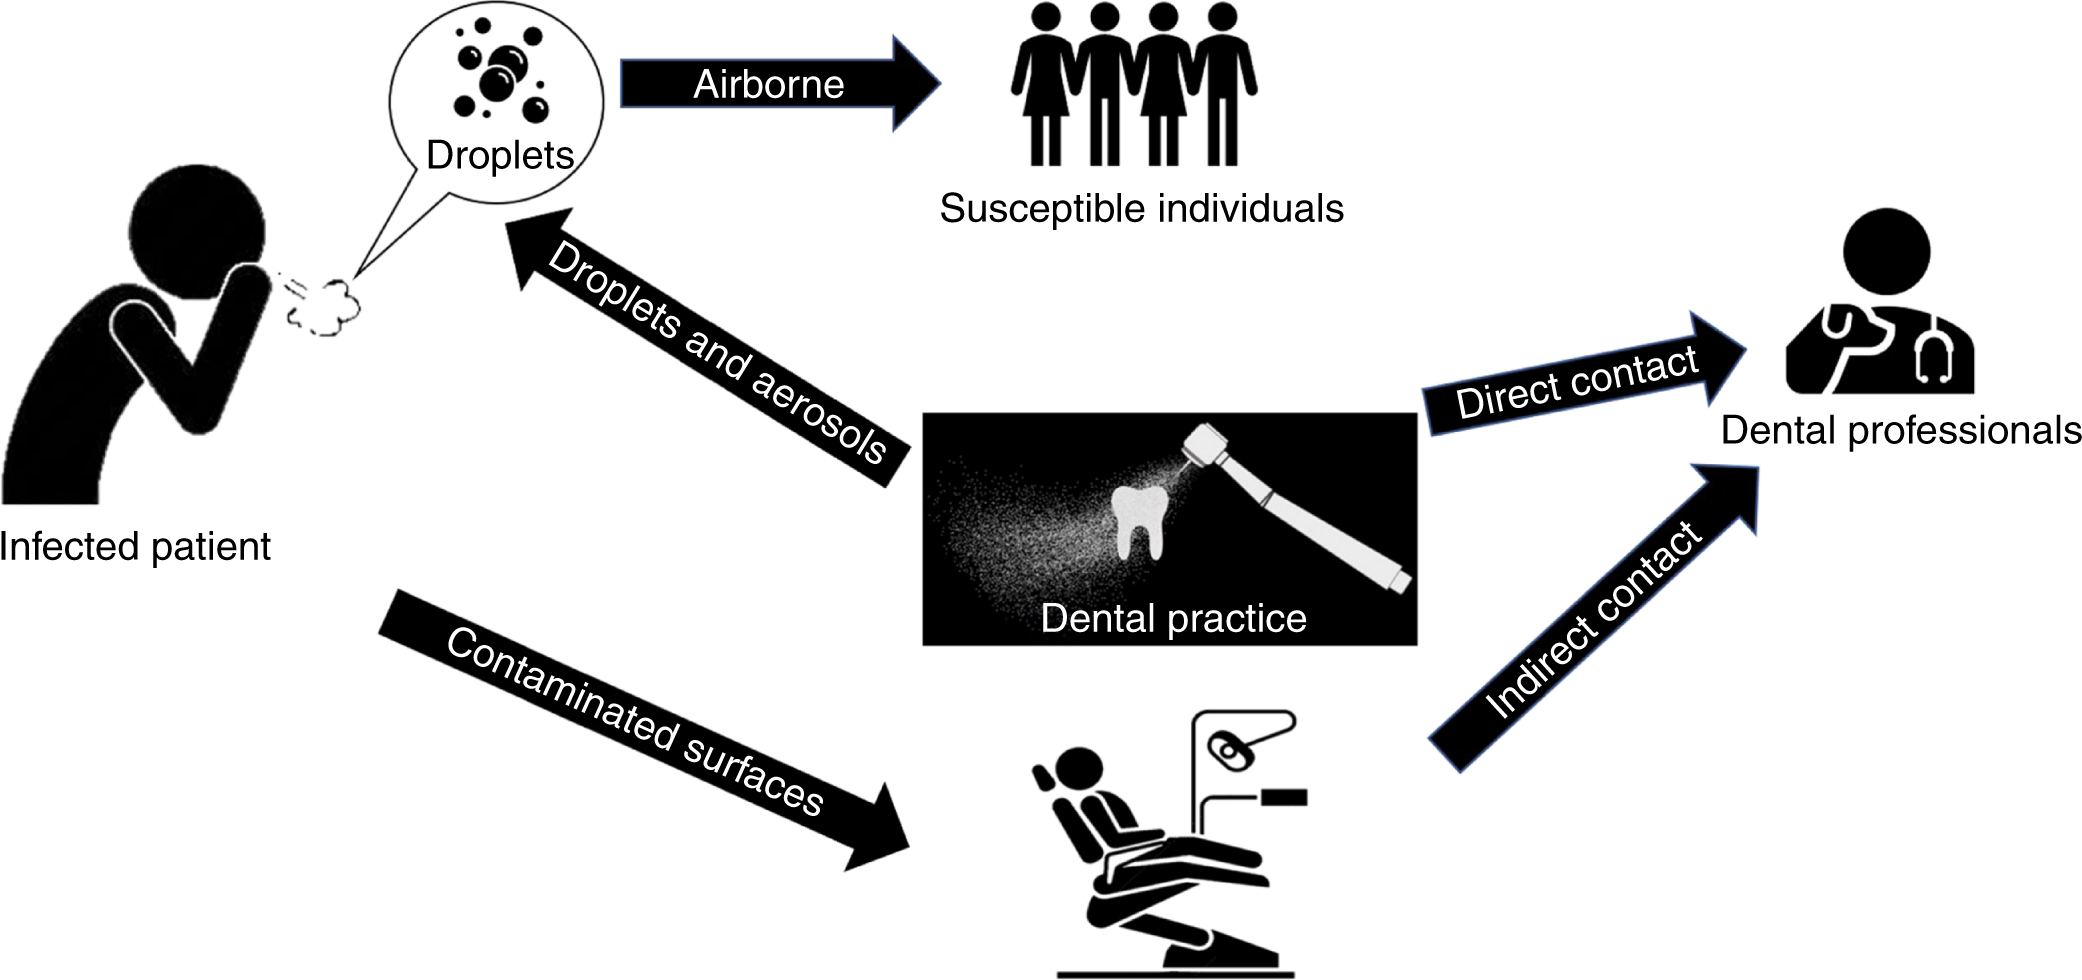 Transmission Routes Of 19 Ncov And Controls In Dental Practice International Journal Of Oral Science